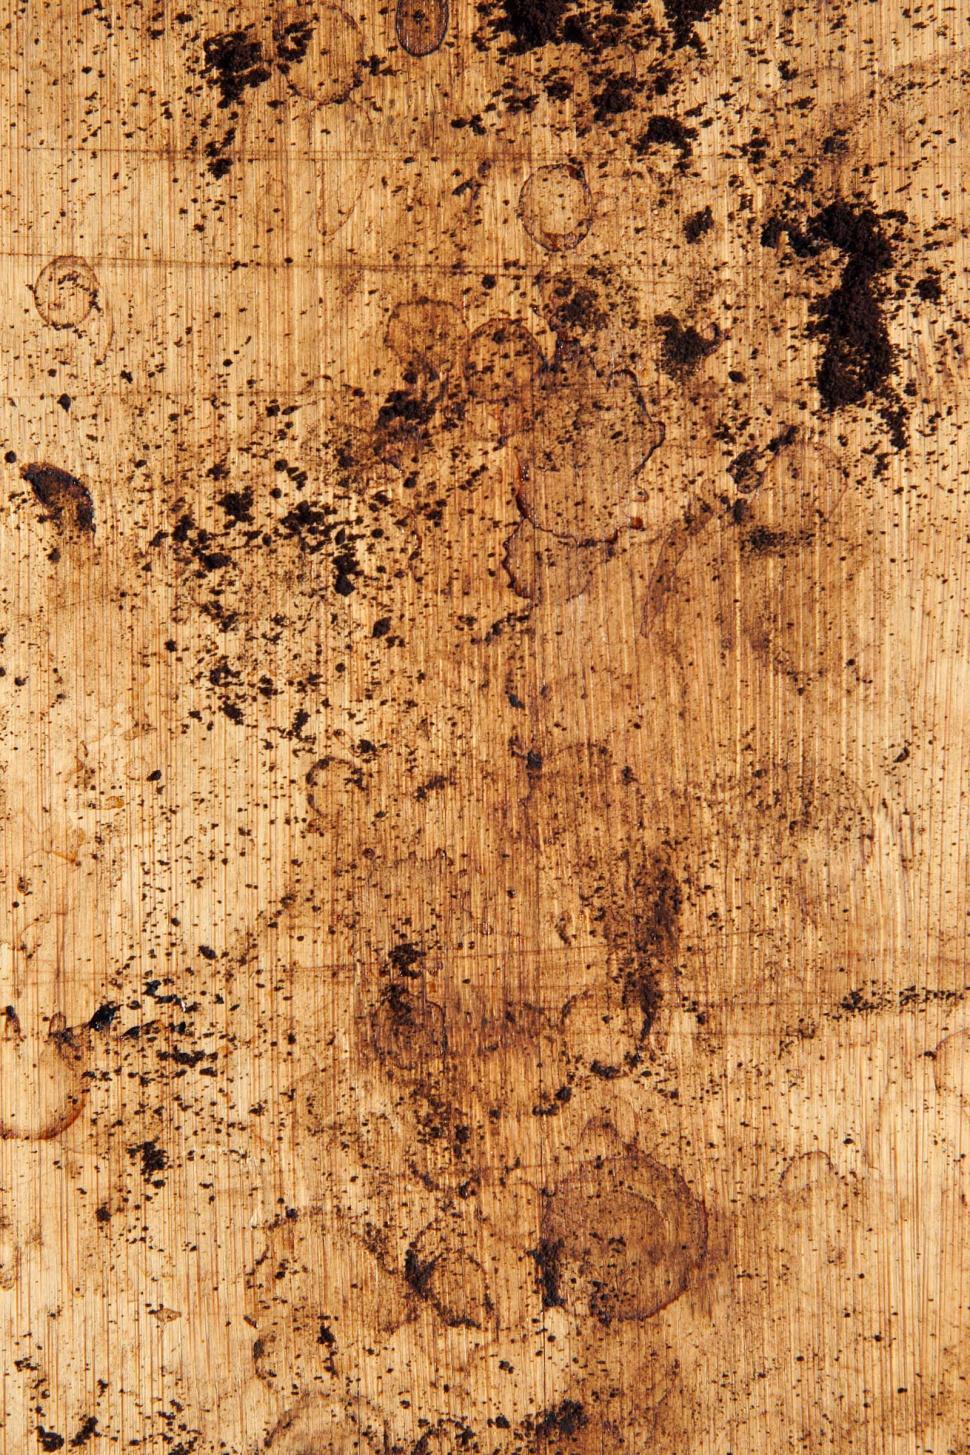 Free Image of Coffee Grounds on Wooden Counter 